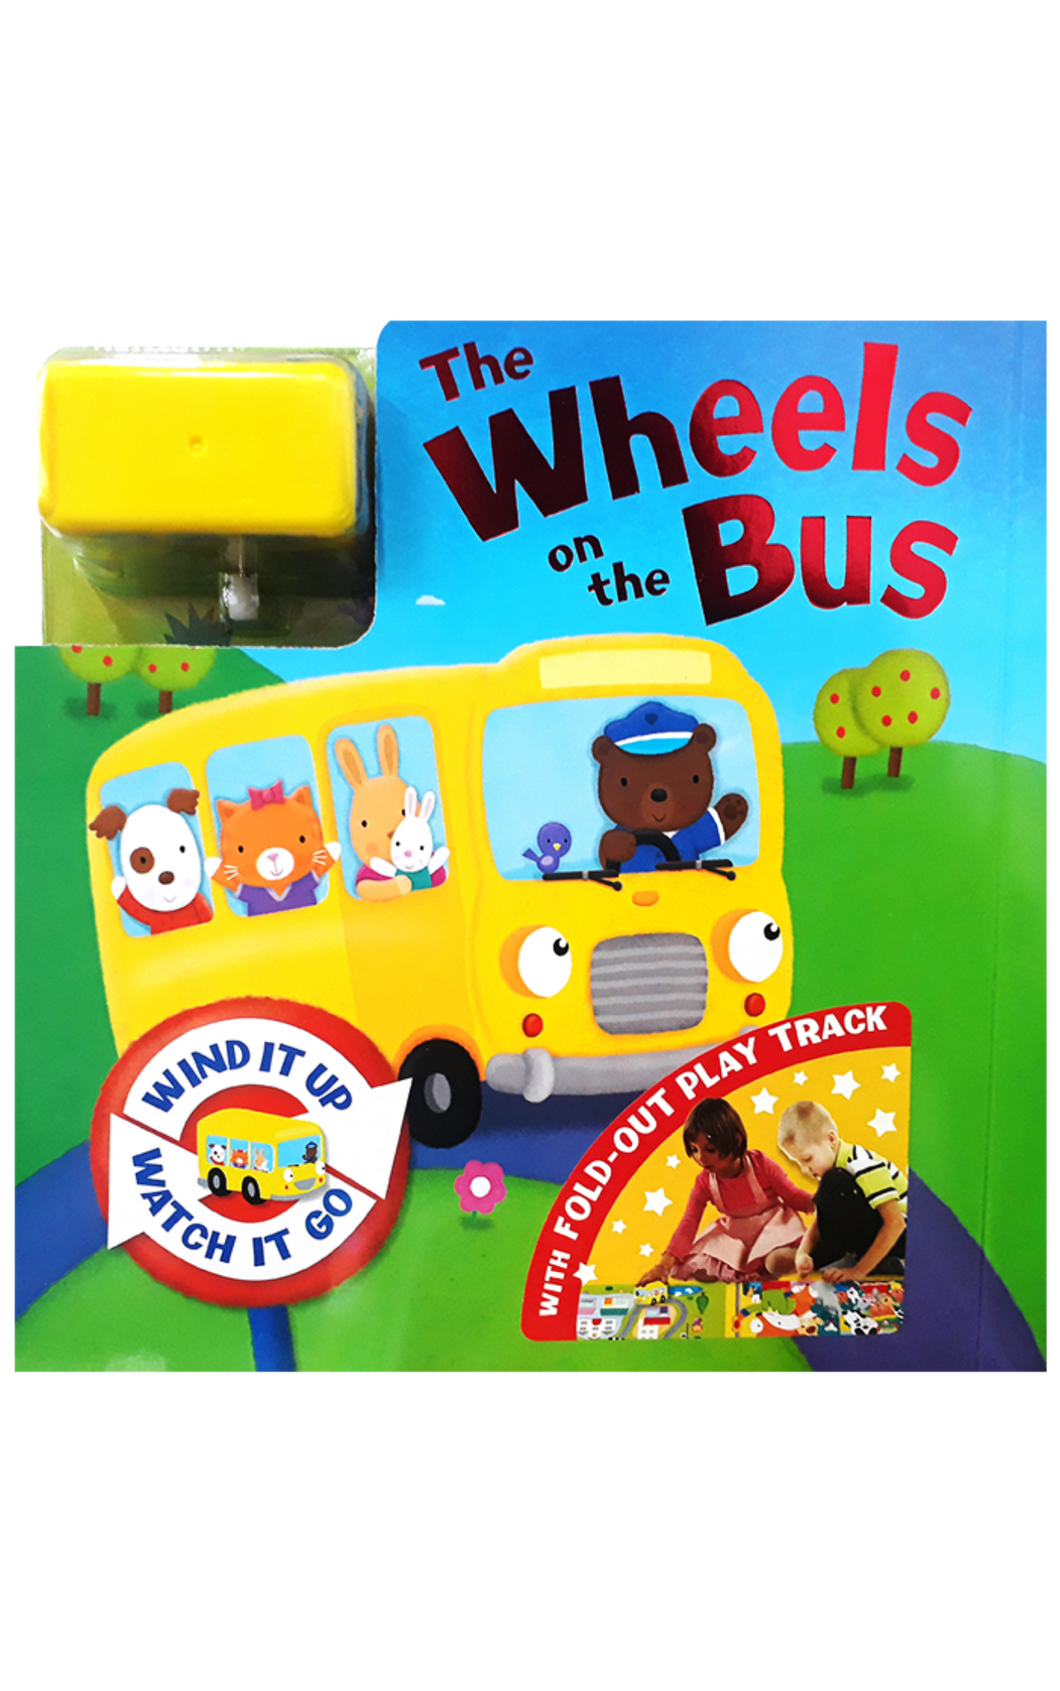 The Wheels on the Bus: Read & Play with Fold-Out Play Mat and Wind-Up Toy